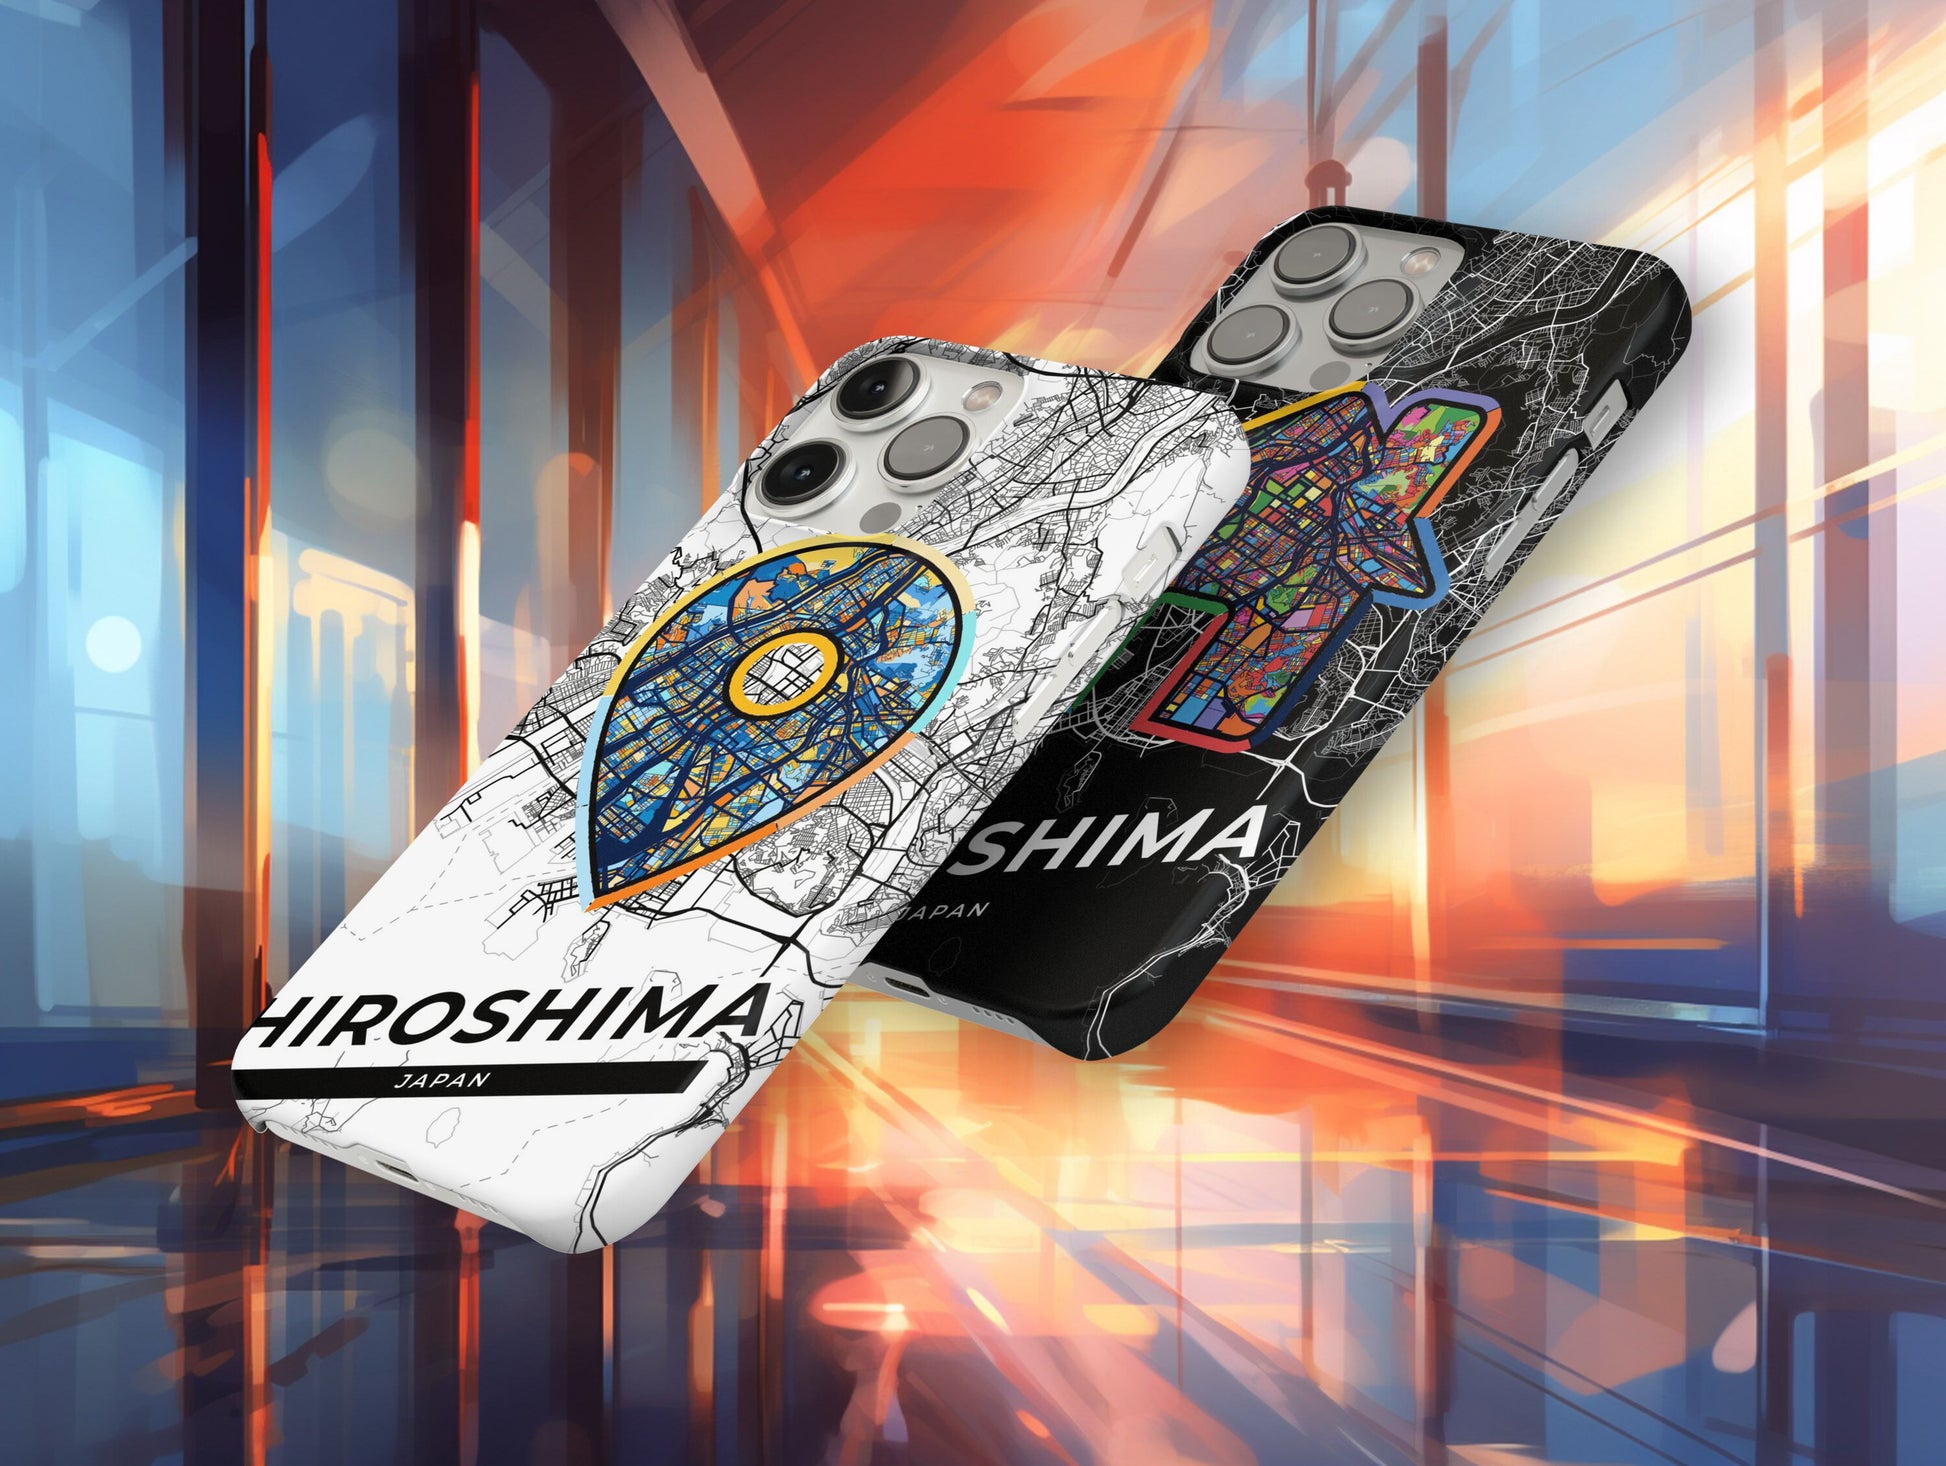 Hiroshima Japan slim phone case with colorful icon. Birthday, wedding or housewarming gift. Couple match cases.